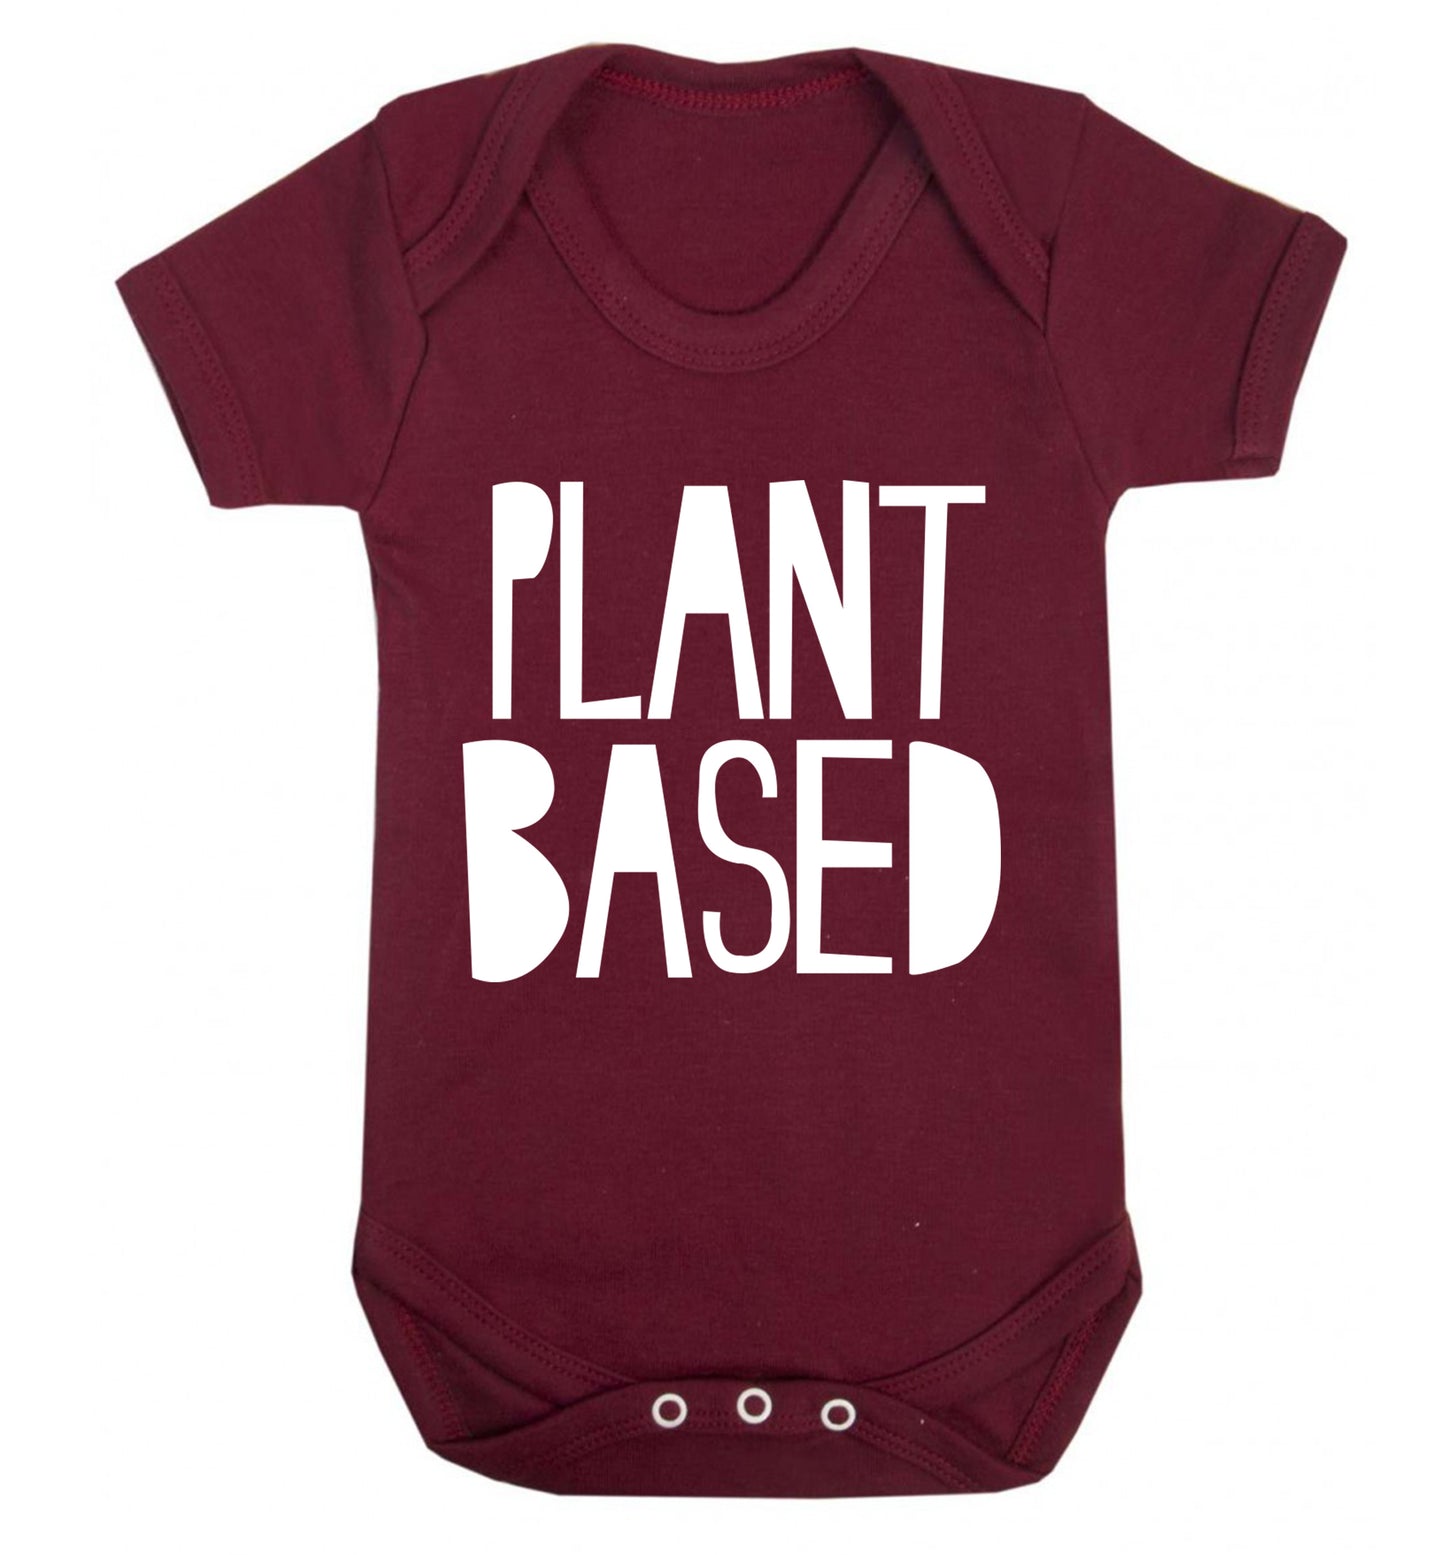 Plant Based Baby Vest maroon 18-24 months